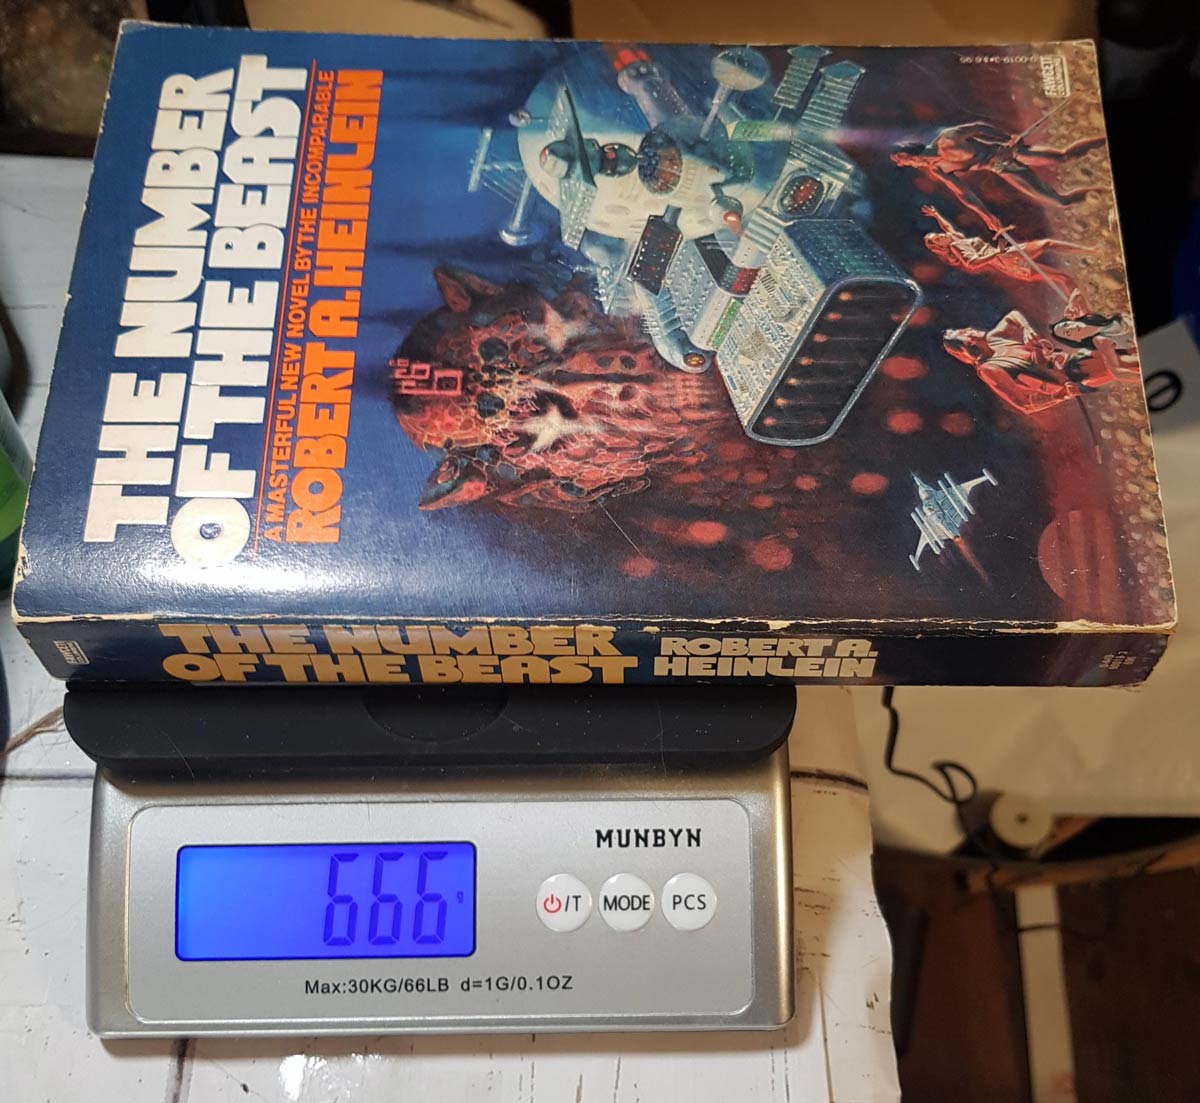 The weight, in grams, of this Robert A. Heinlein book